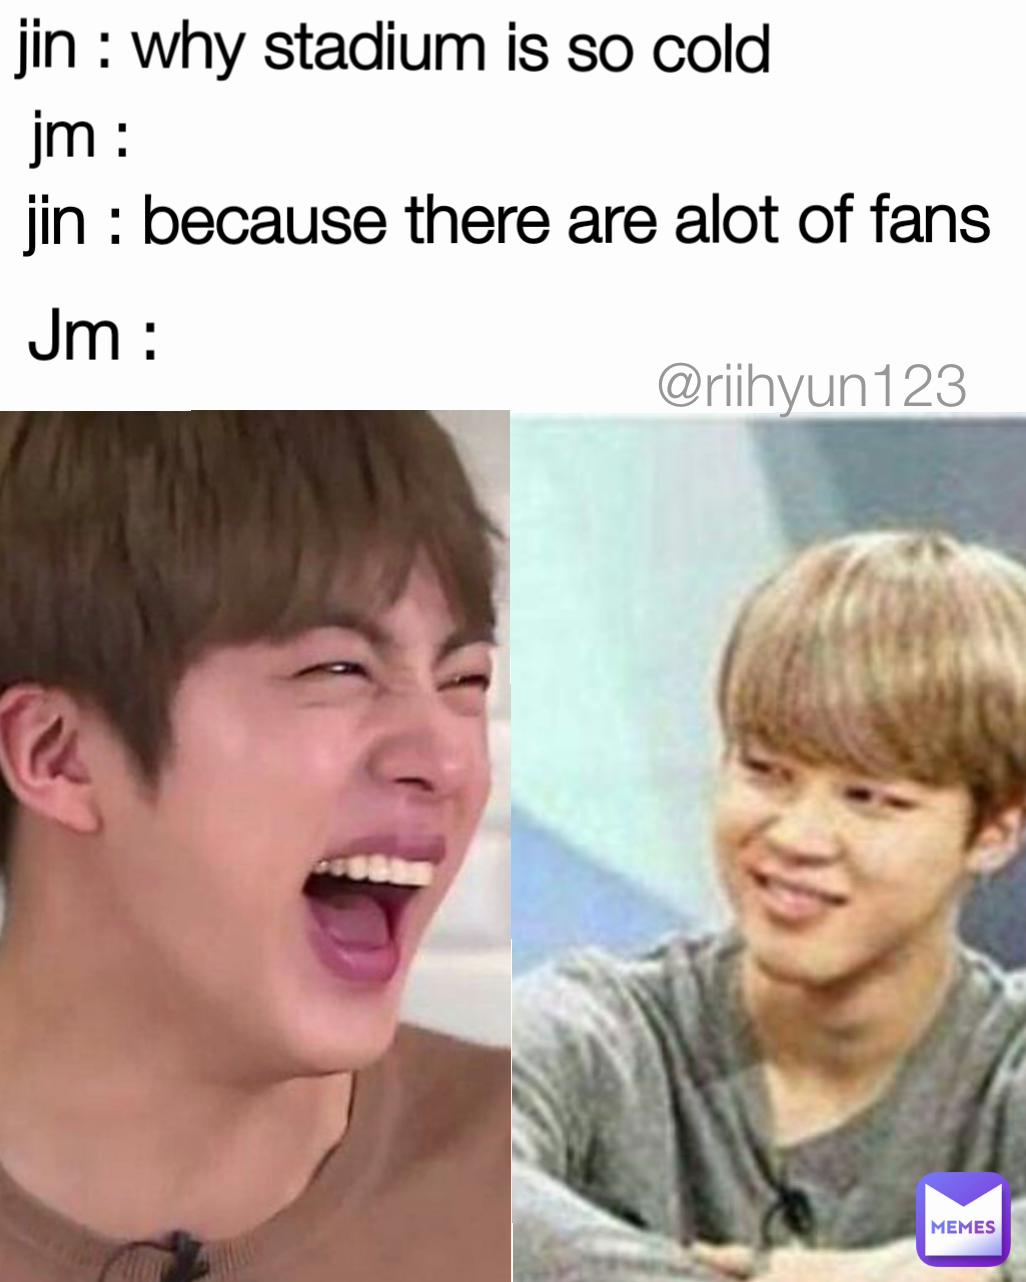 Jm :  jm :  @riihyun123
 jin : why stadium is so cold  jin : because there are alot of fans 